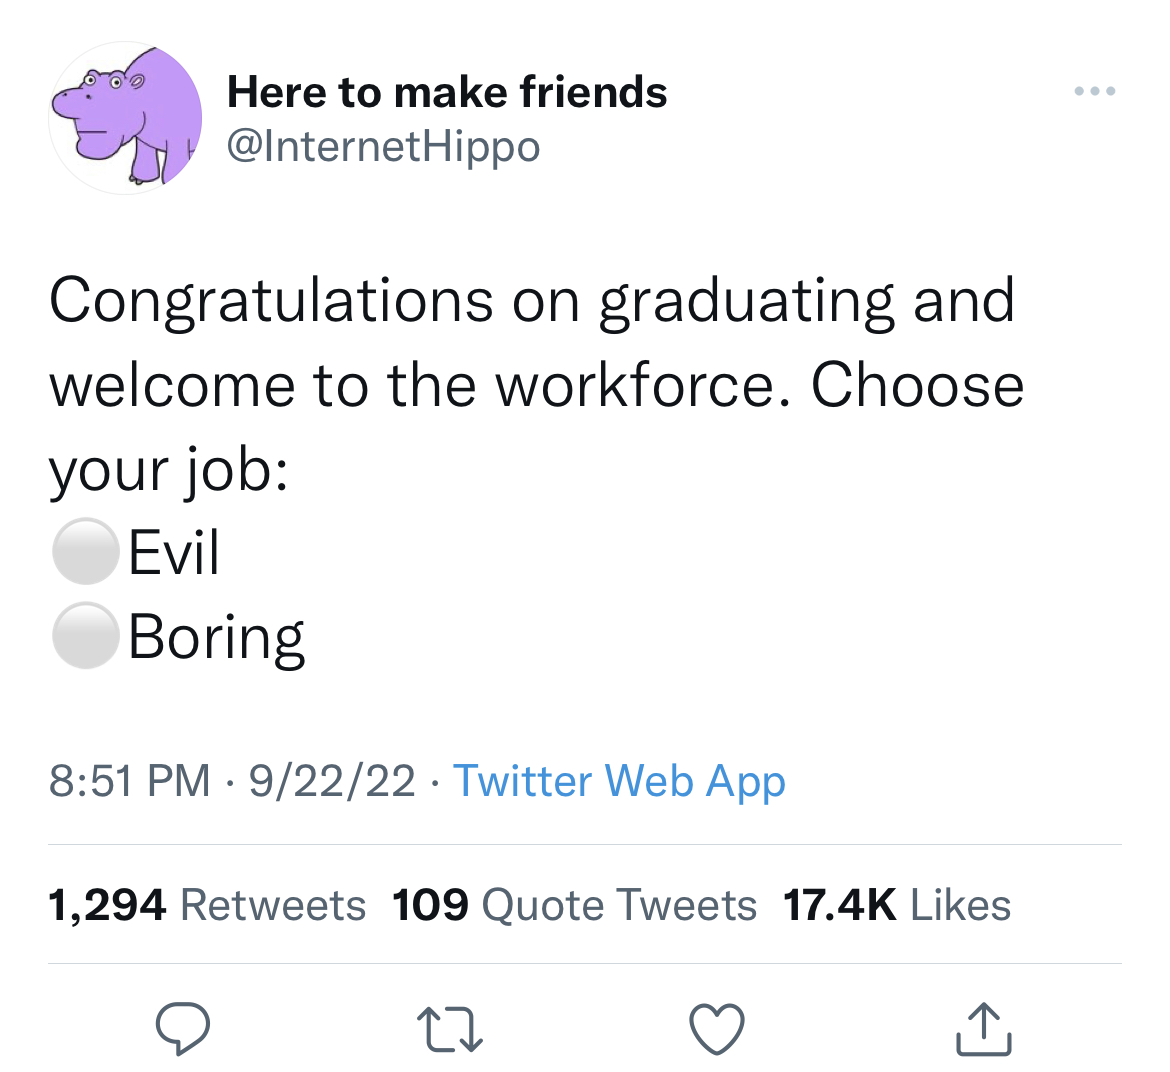 funny tweets - Blog - Here to make friends Congratulations on graduating and welcome to the workforce. Choose your job Evil Boring 92222 Twitter Web App 1,294 109 Quote Tweets 27